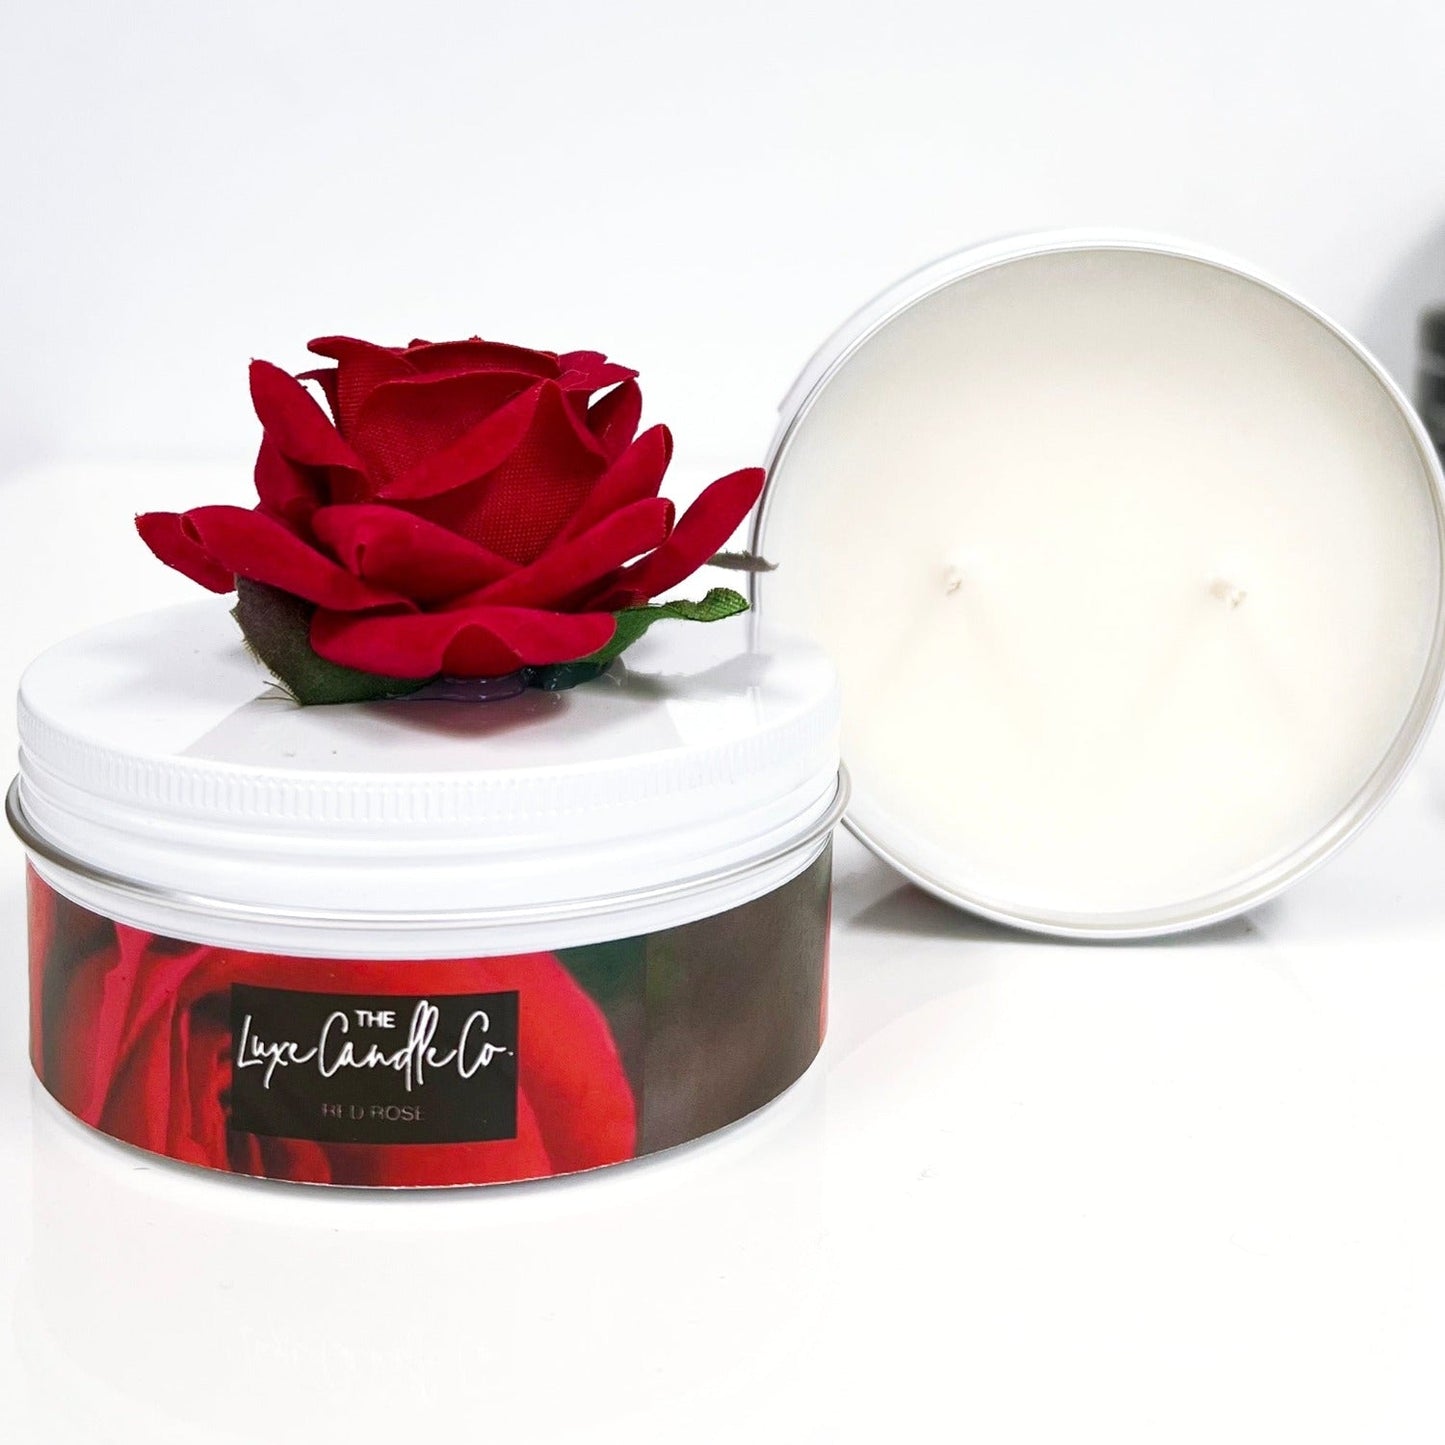 Valentines Candle for wife handmade with red velvet rose scented with rose